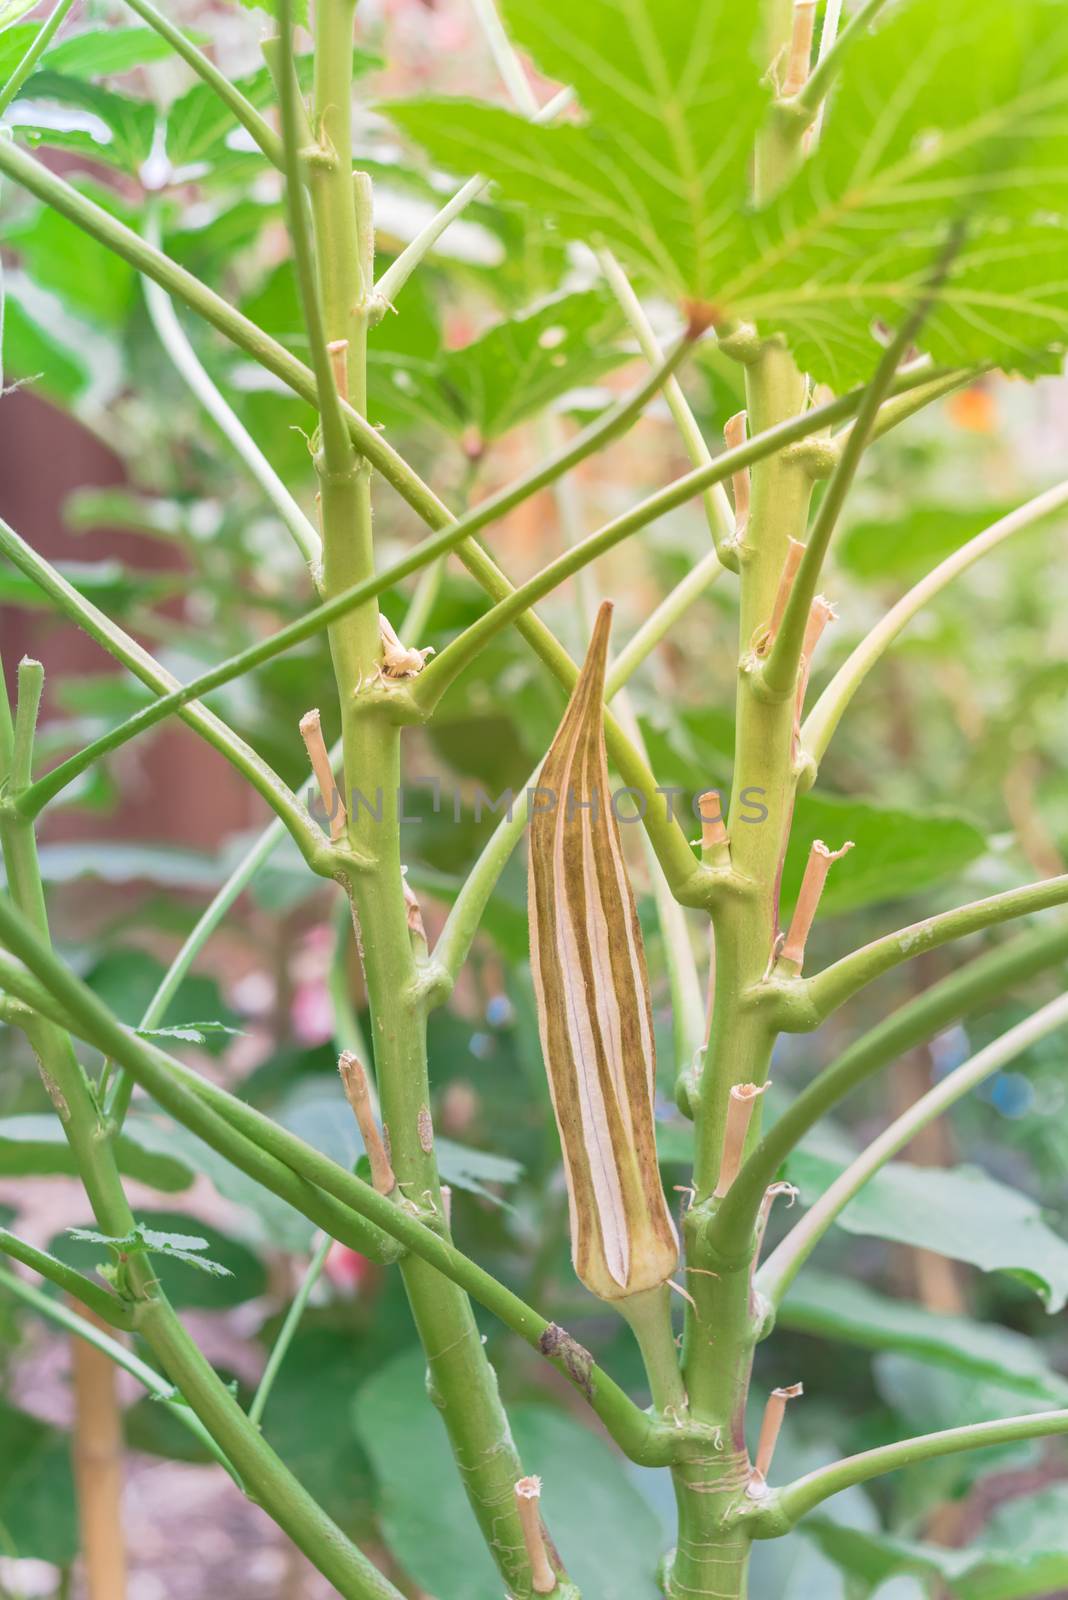 Organic okra pod mature and dry on the plant for saving seeds at backyard garden near Dallas, Texas, USA by trongnguyen